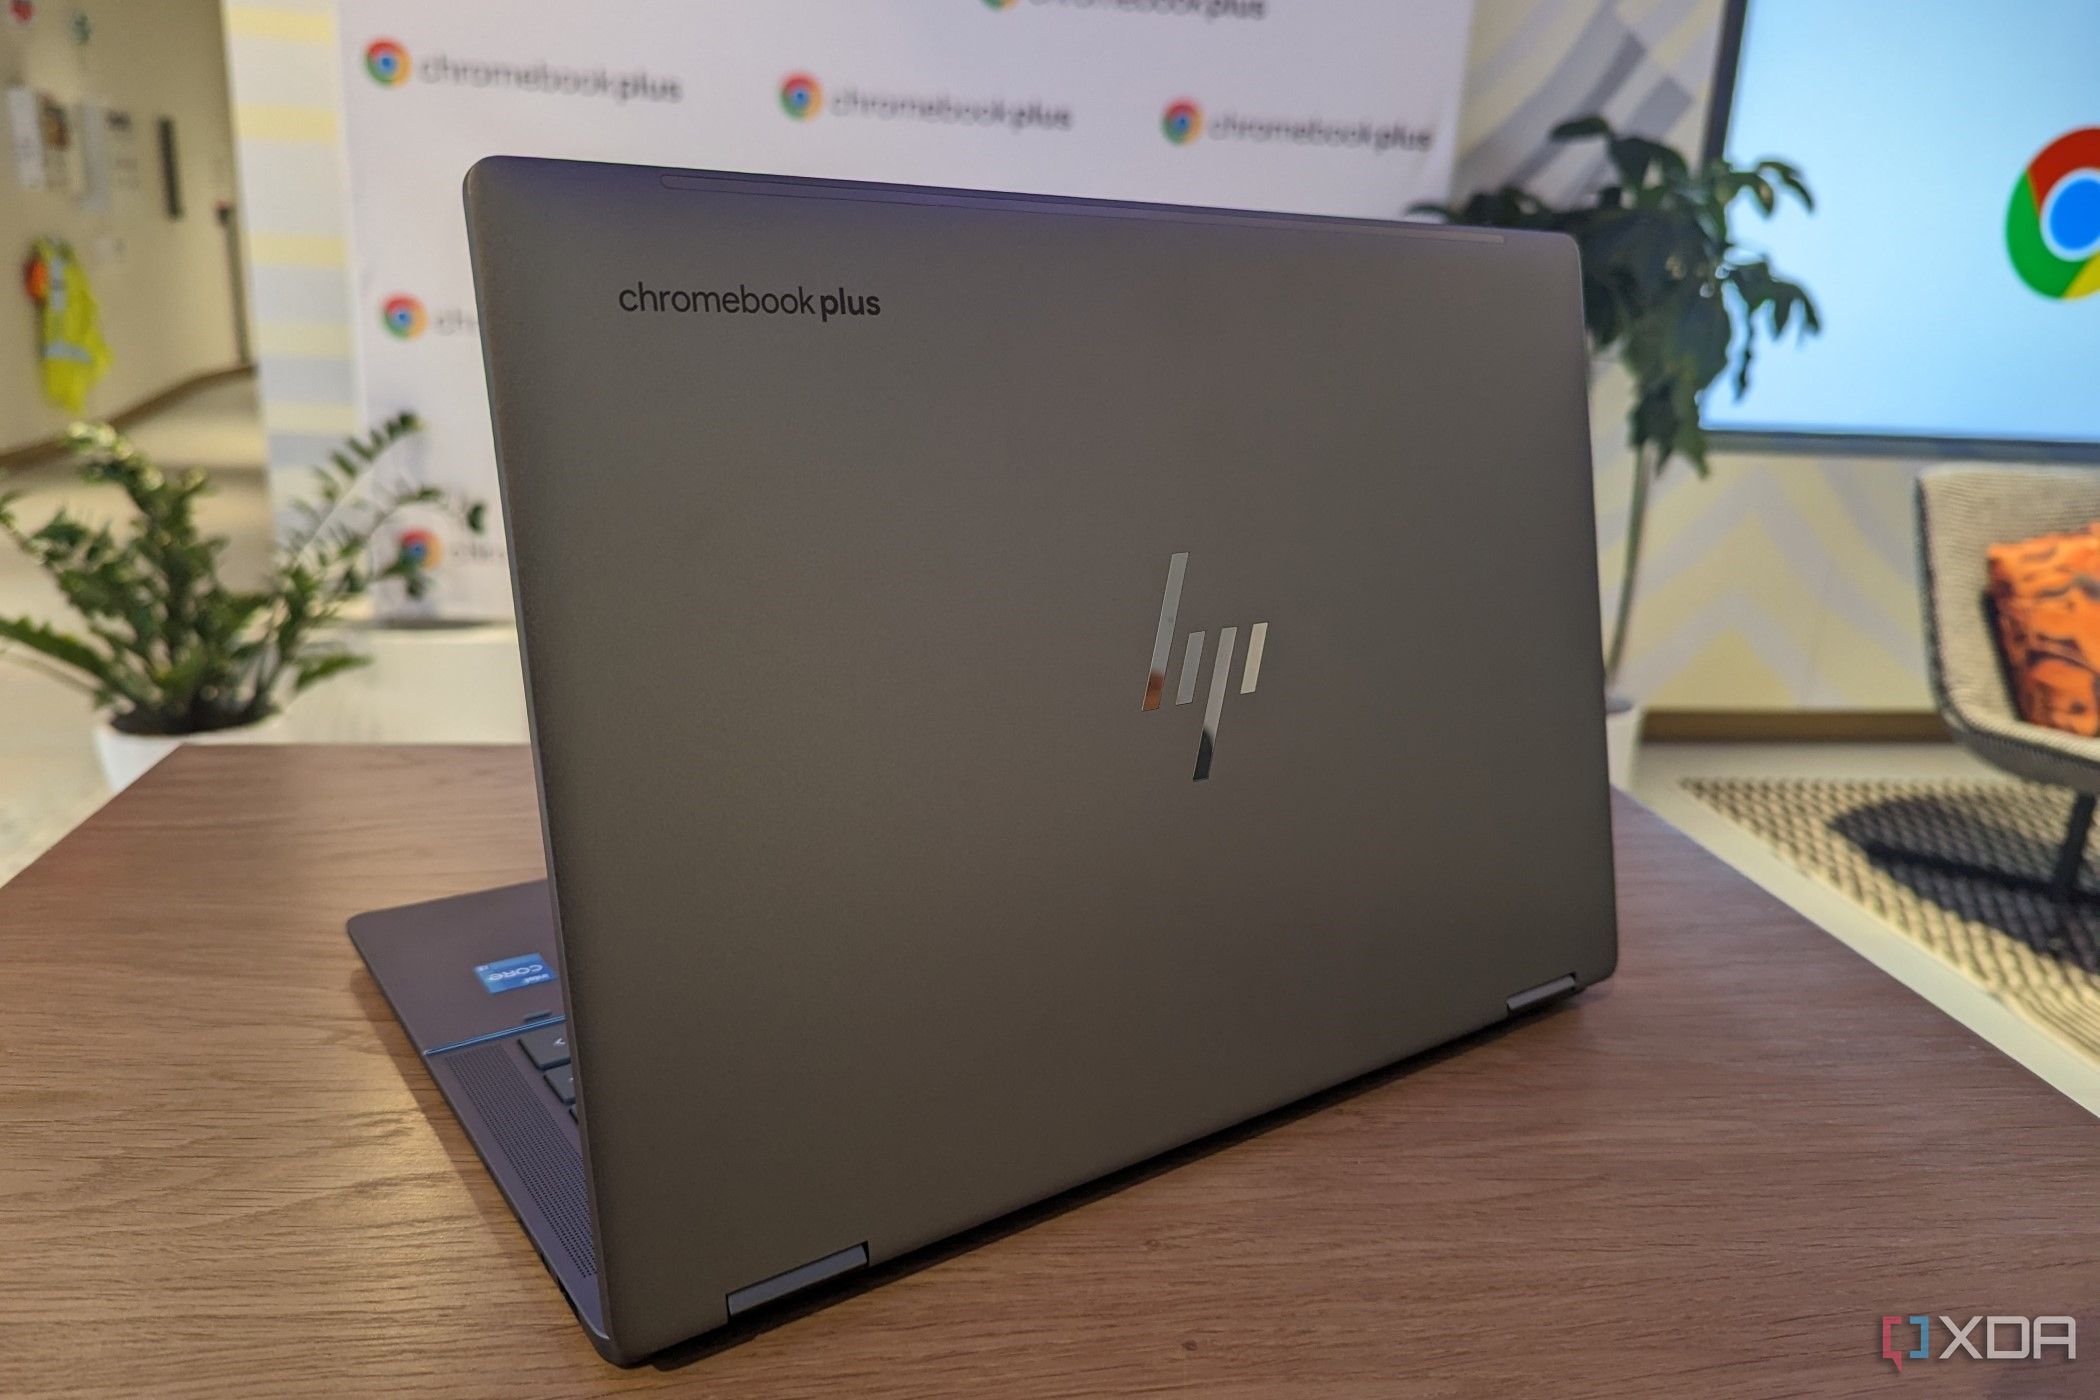 An HP Chromebooks Plus model sitting on a table with GOogle Chrome logo in the back